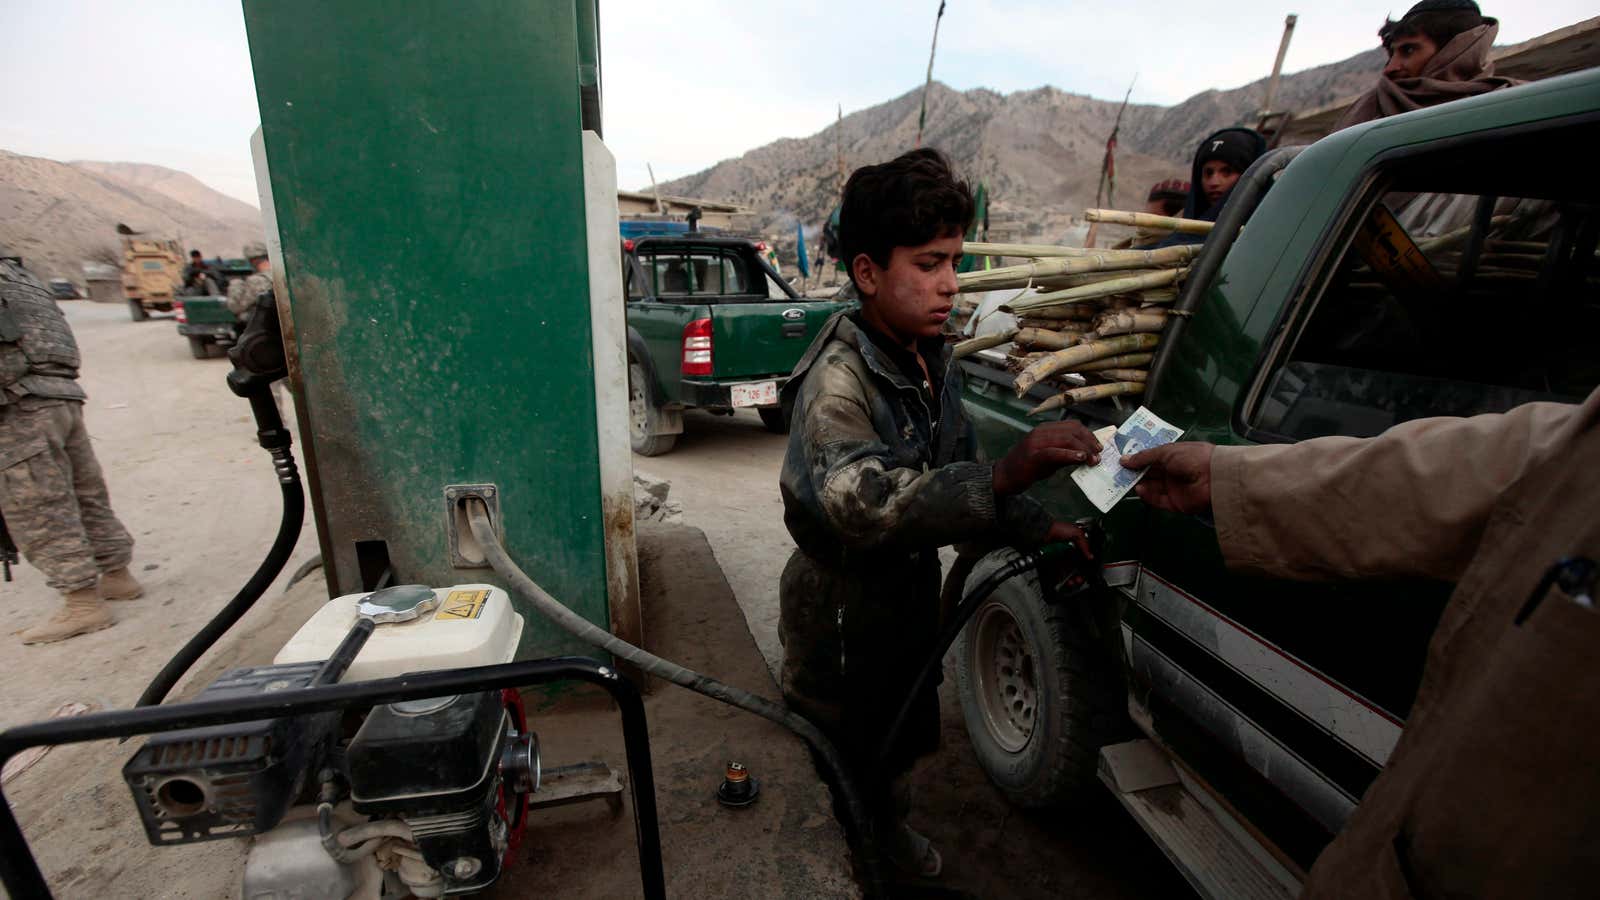 An Afghan gas station that cost considerably less than $43 million.